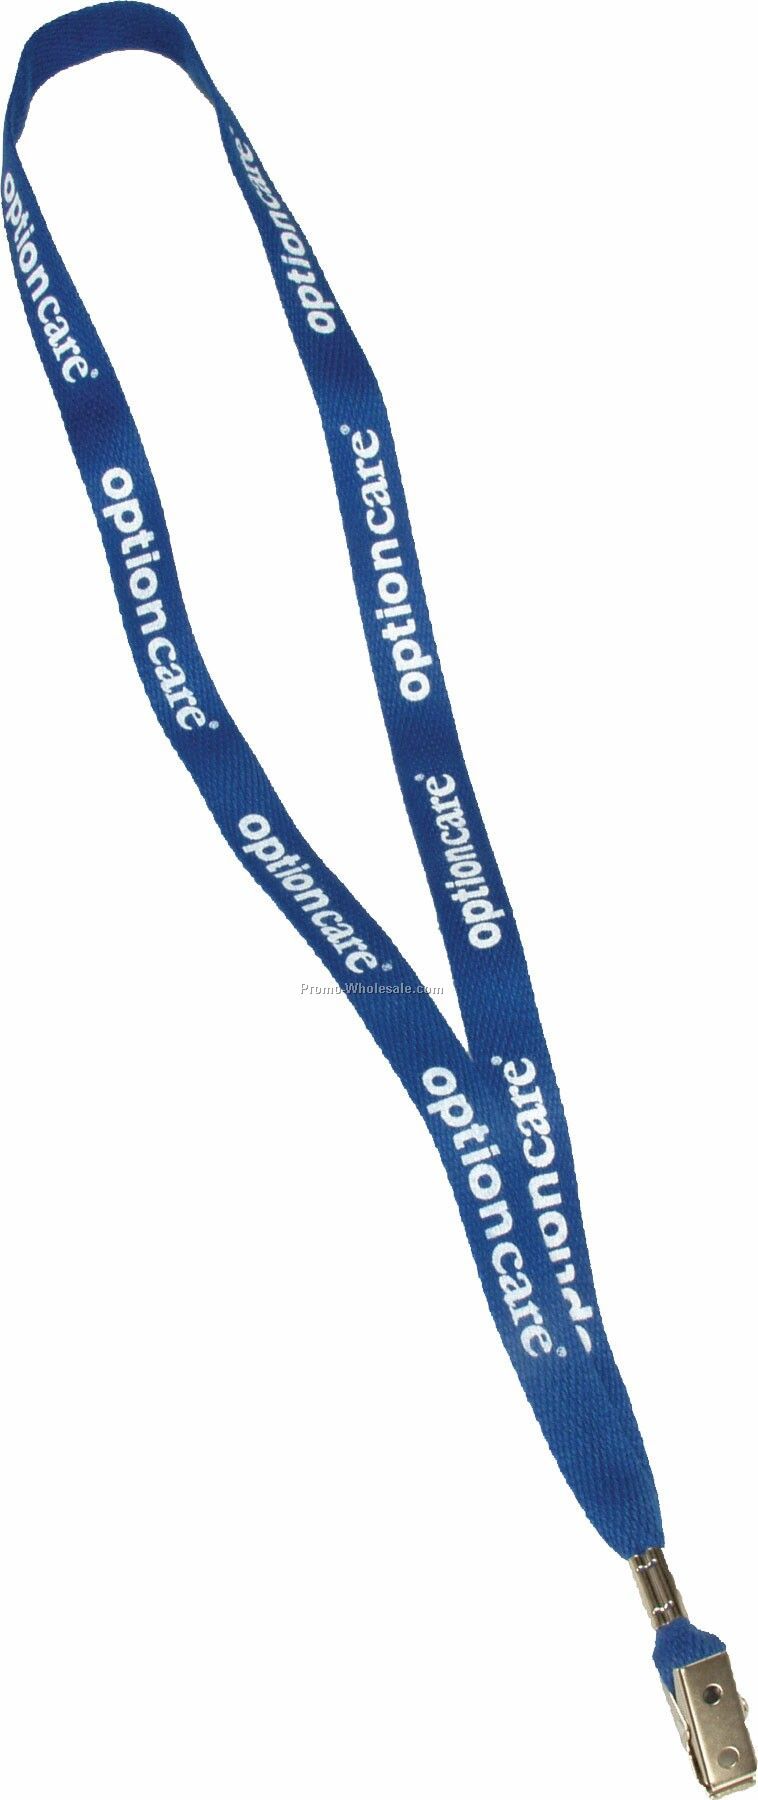 5/8"x34" Fields 1 Ply Cotton Lanyards - Next Day